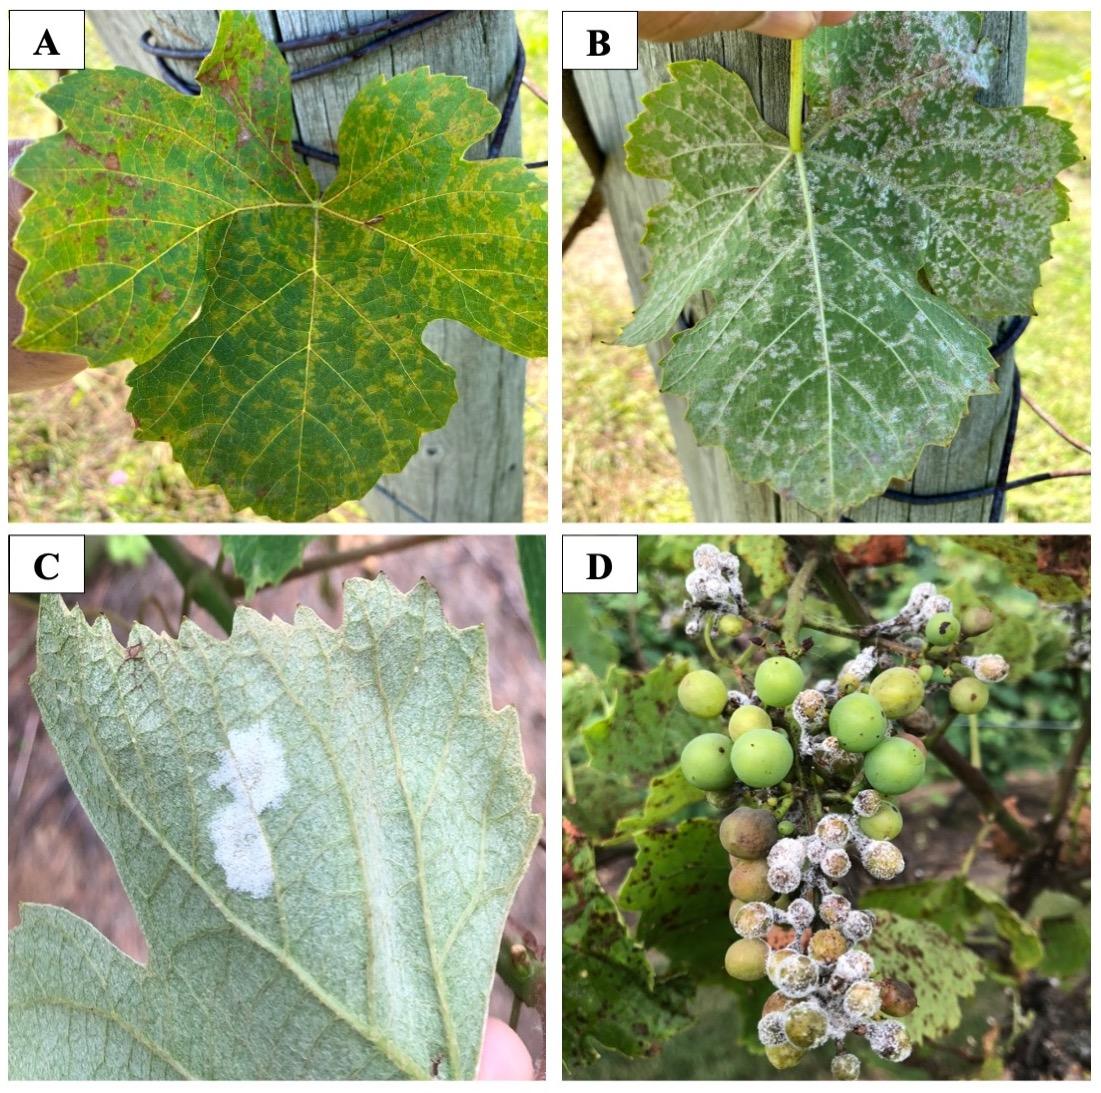 Four different pictures of grape leaves and berries infected with downy mildew.